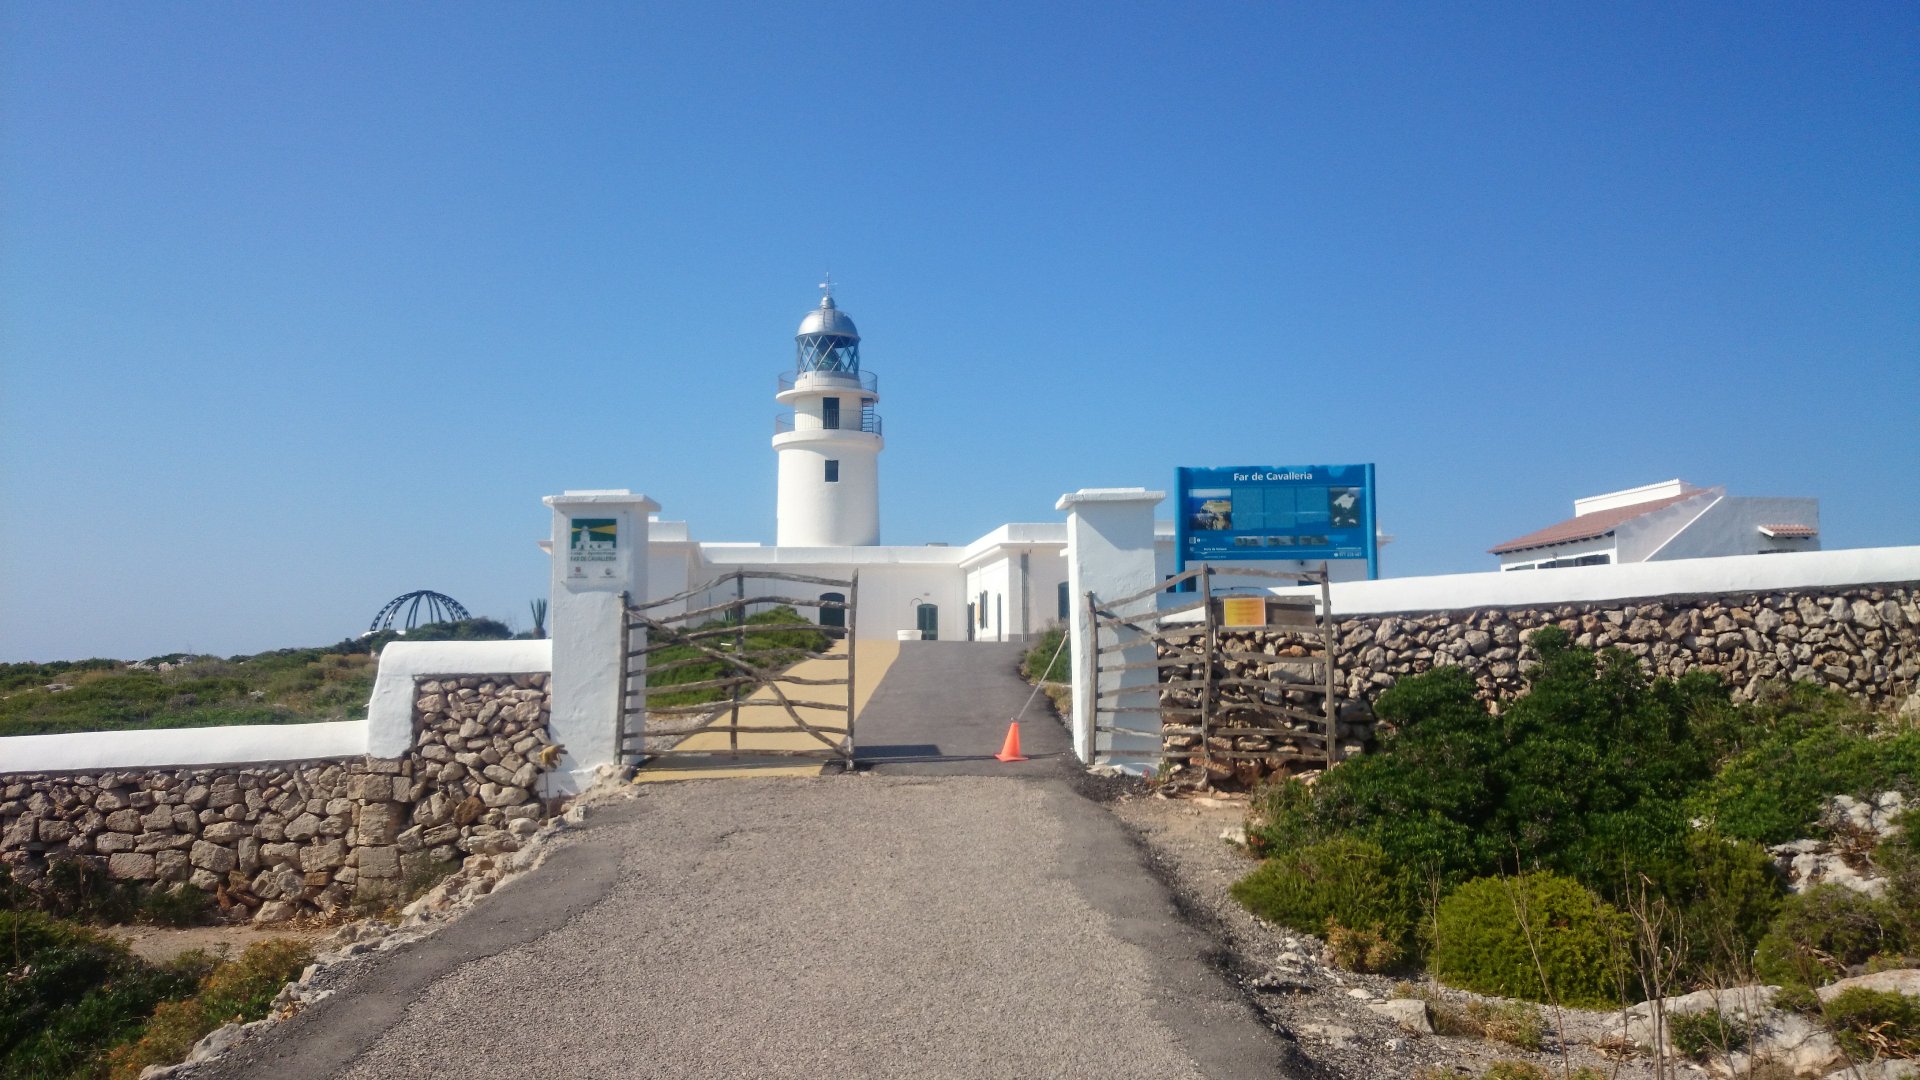 A visit to the lighthouses of the Balearic Islands